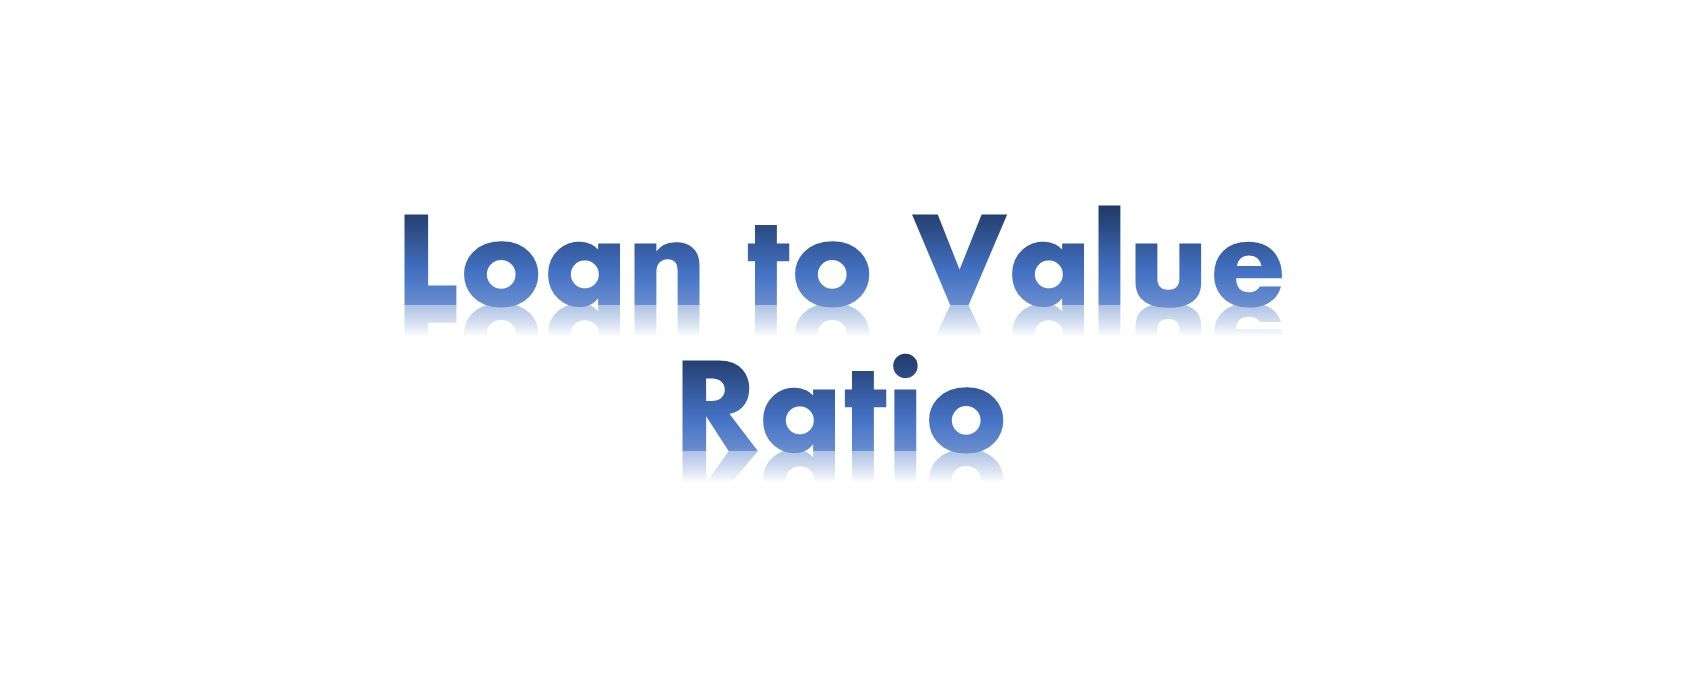 Loan to Value Ratio LVR